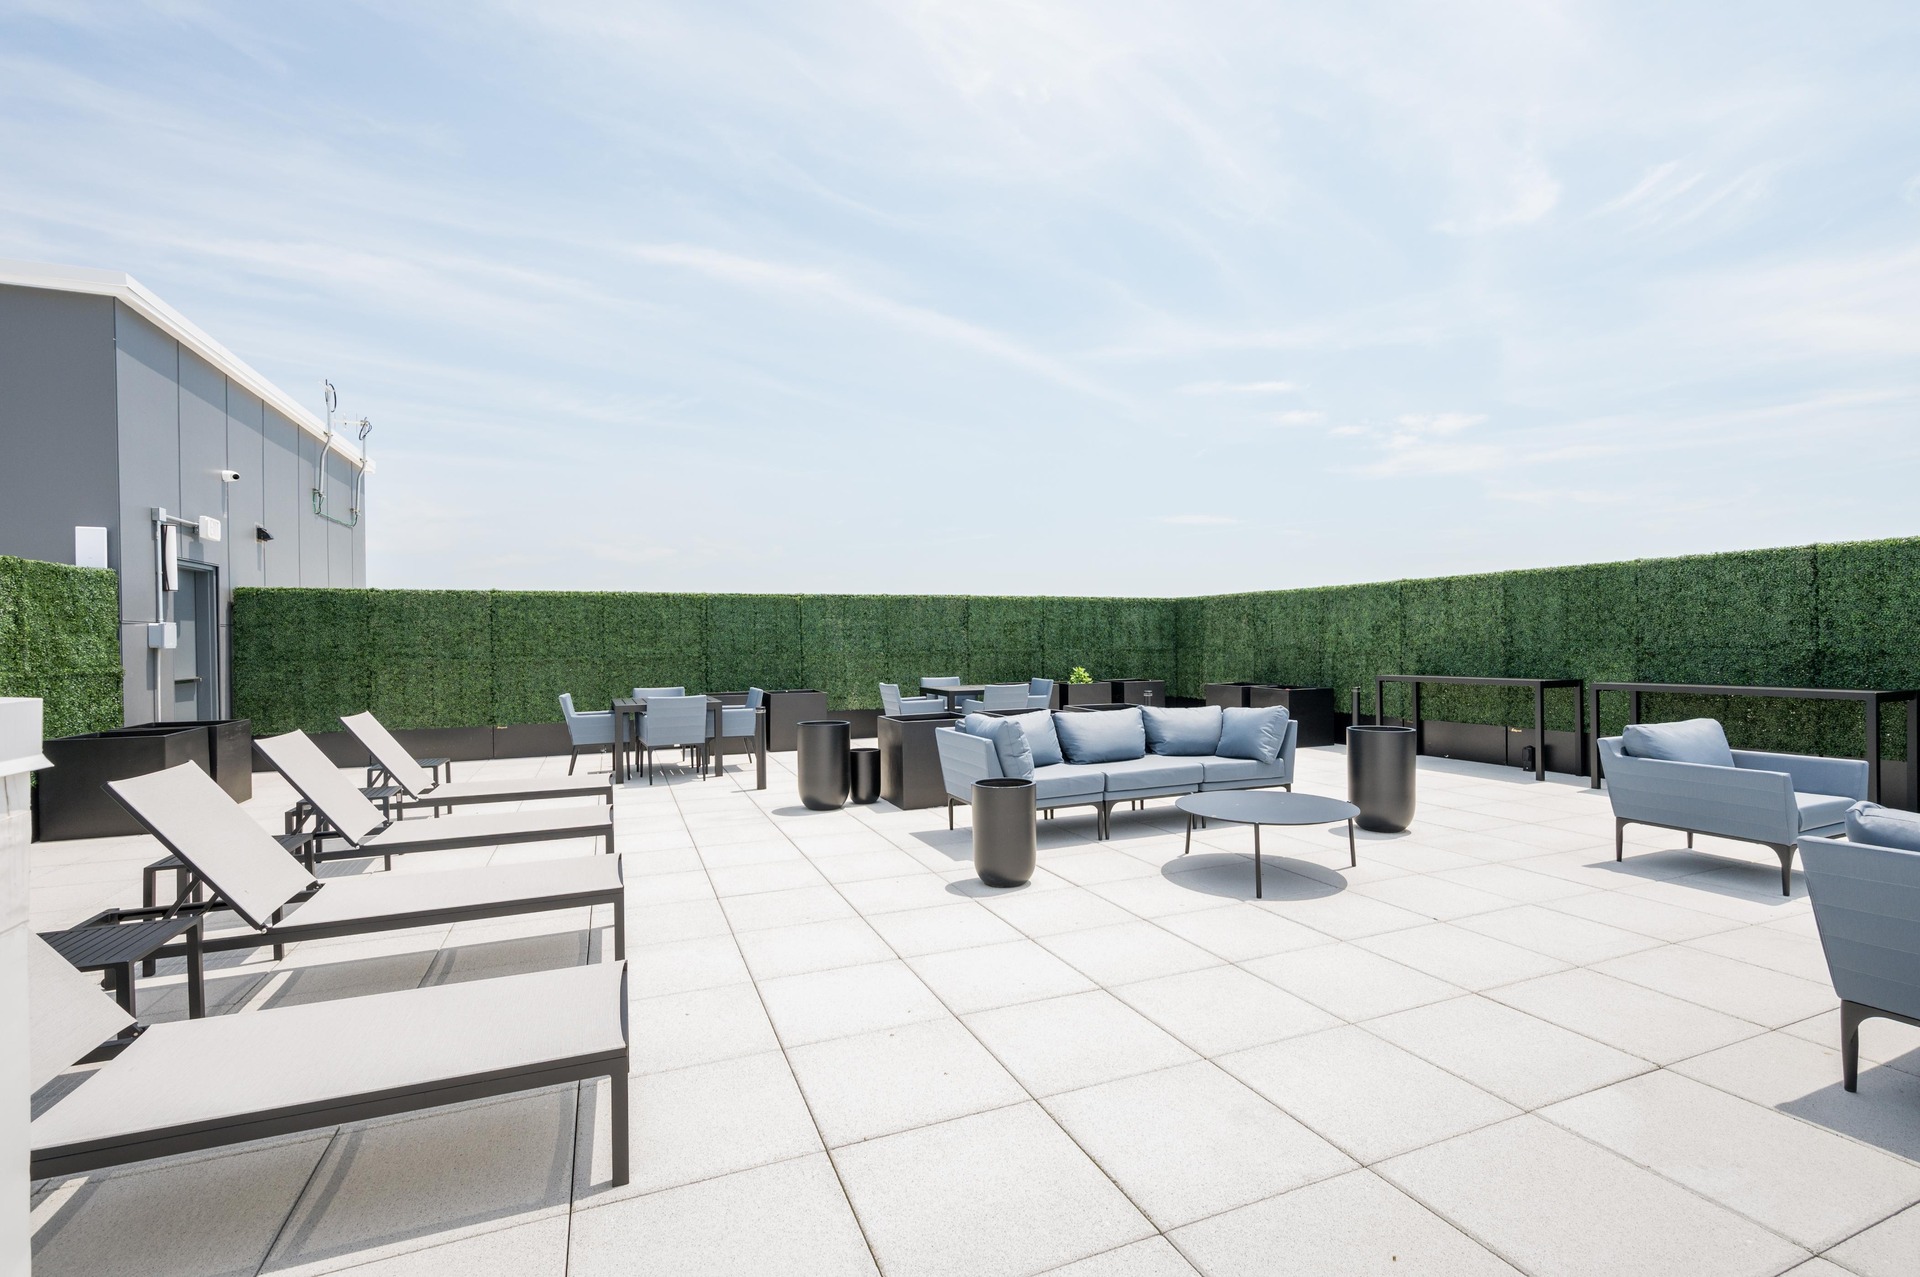 Additional rooftop lounge area.